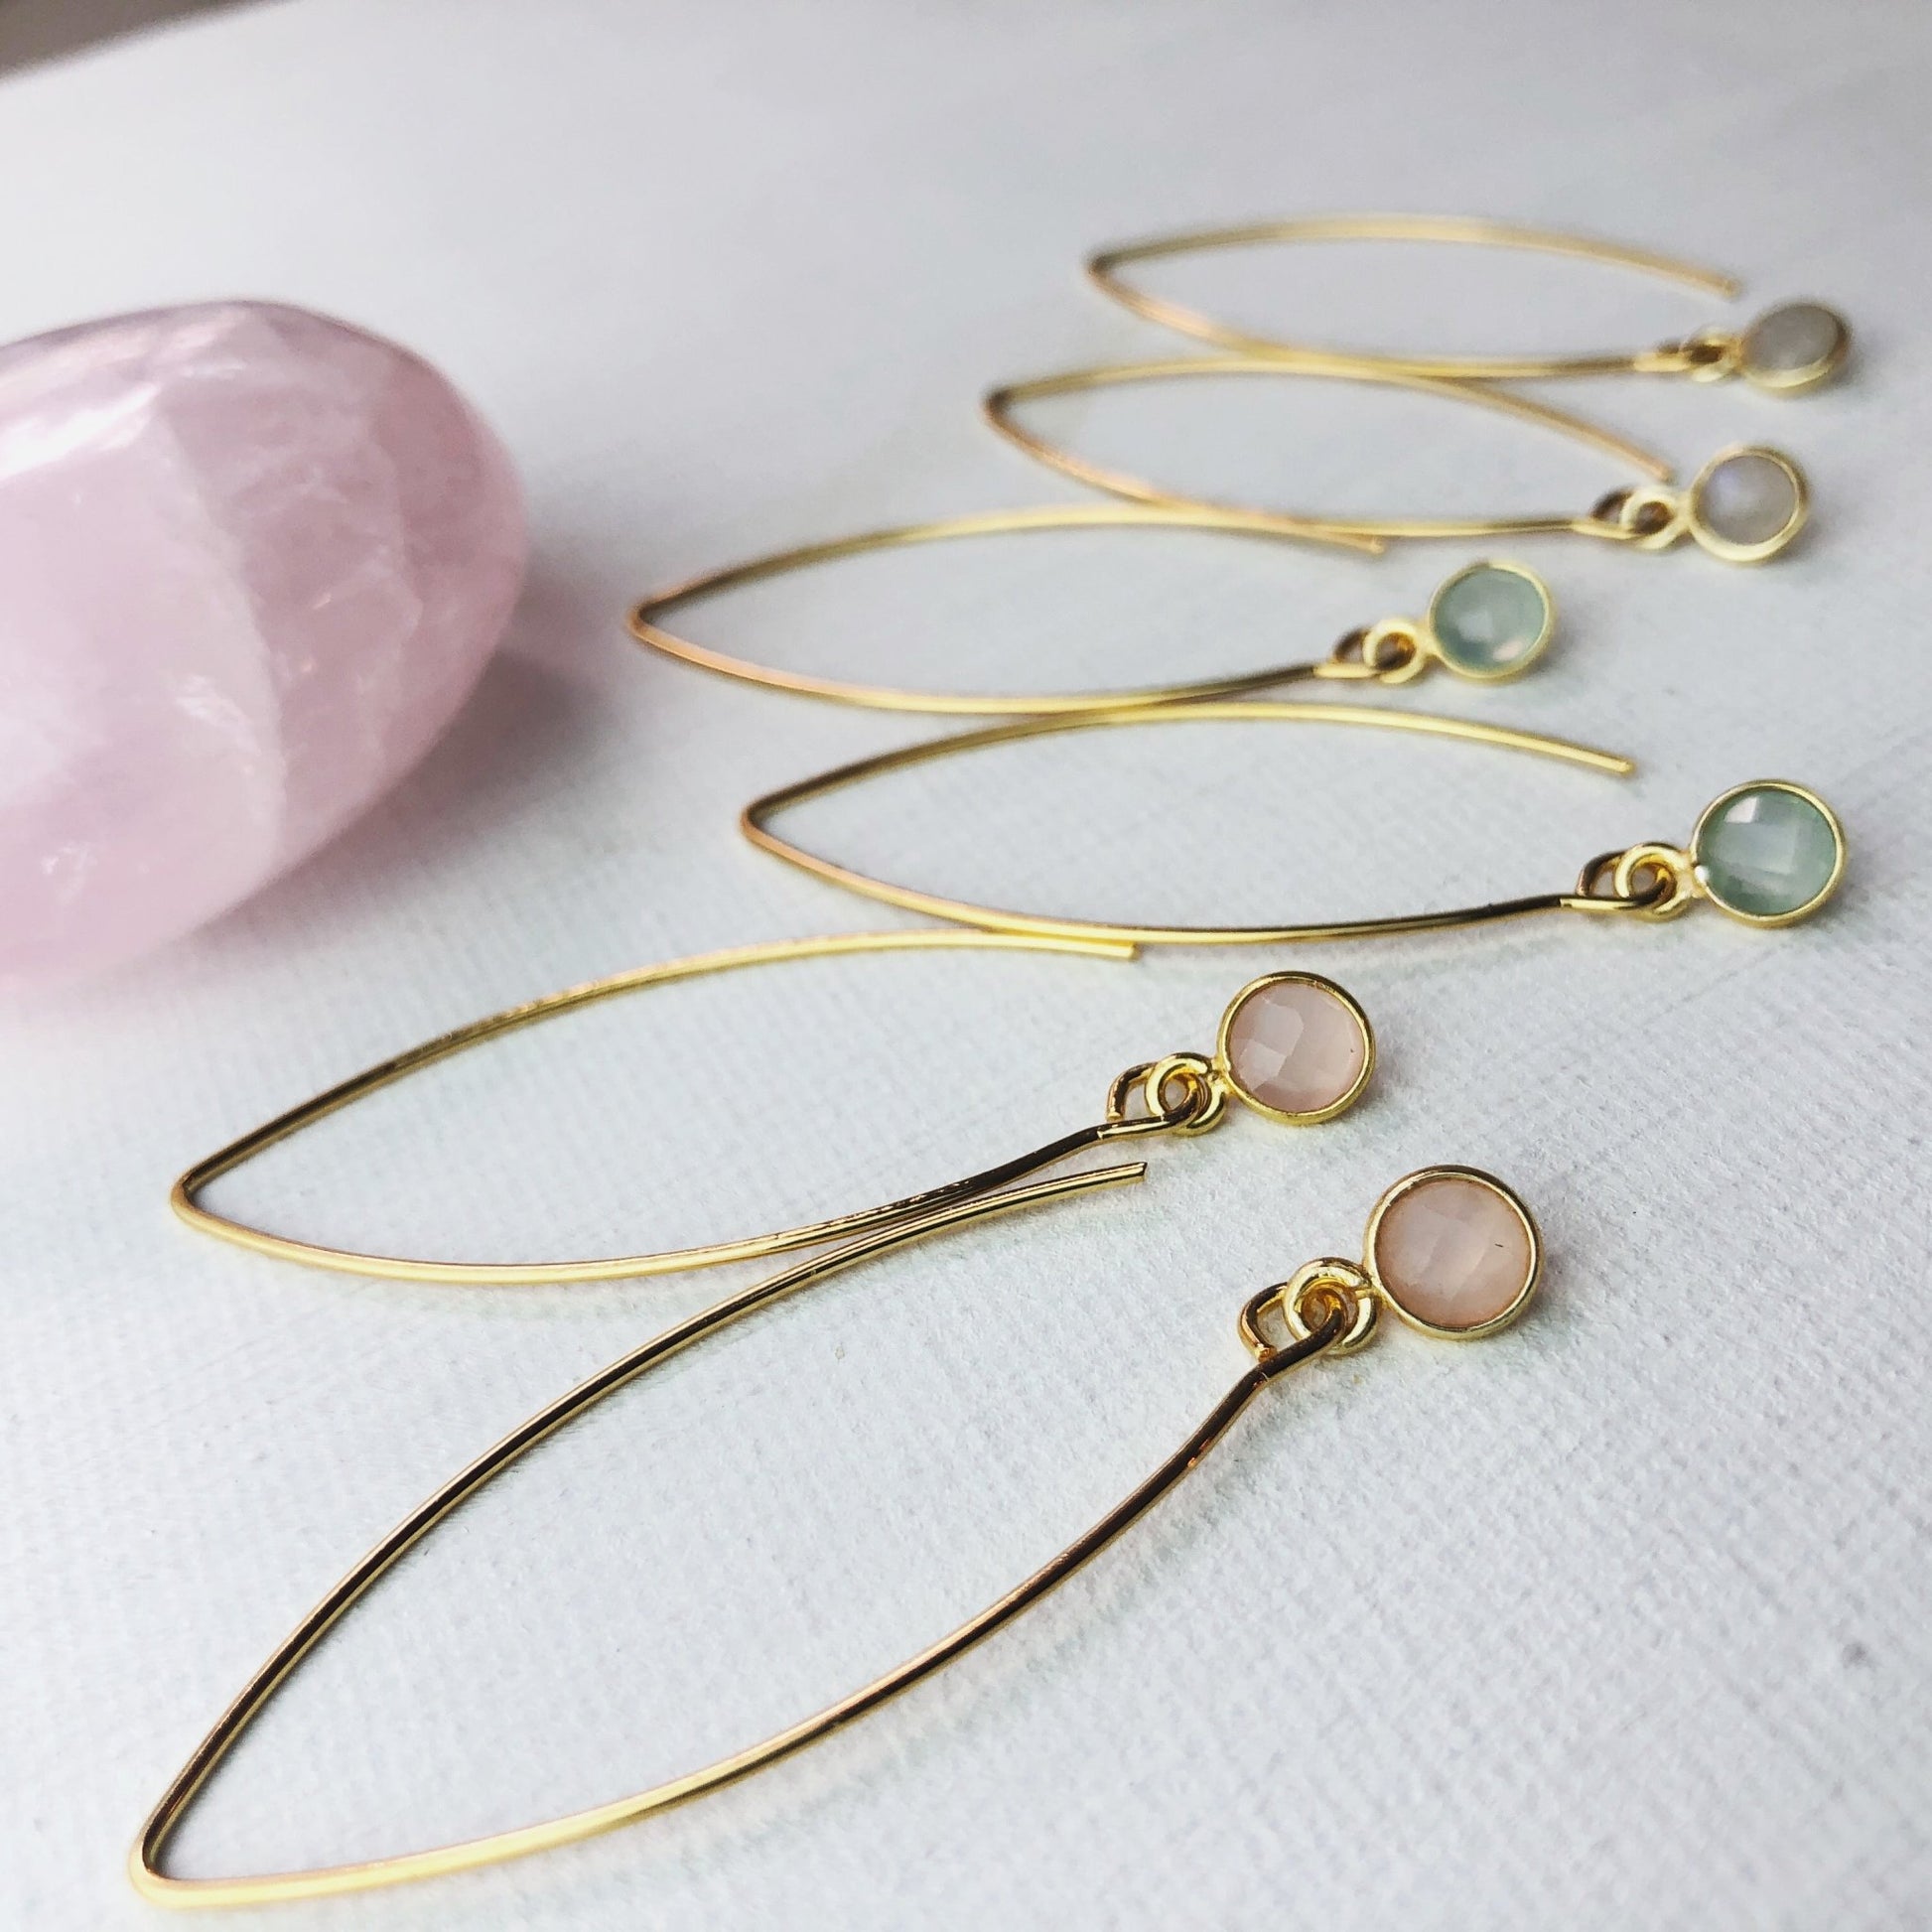 Gemstone Dangle Earrings - 8 colors available - Sunday Girl by Amy DiLamarraEarrings